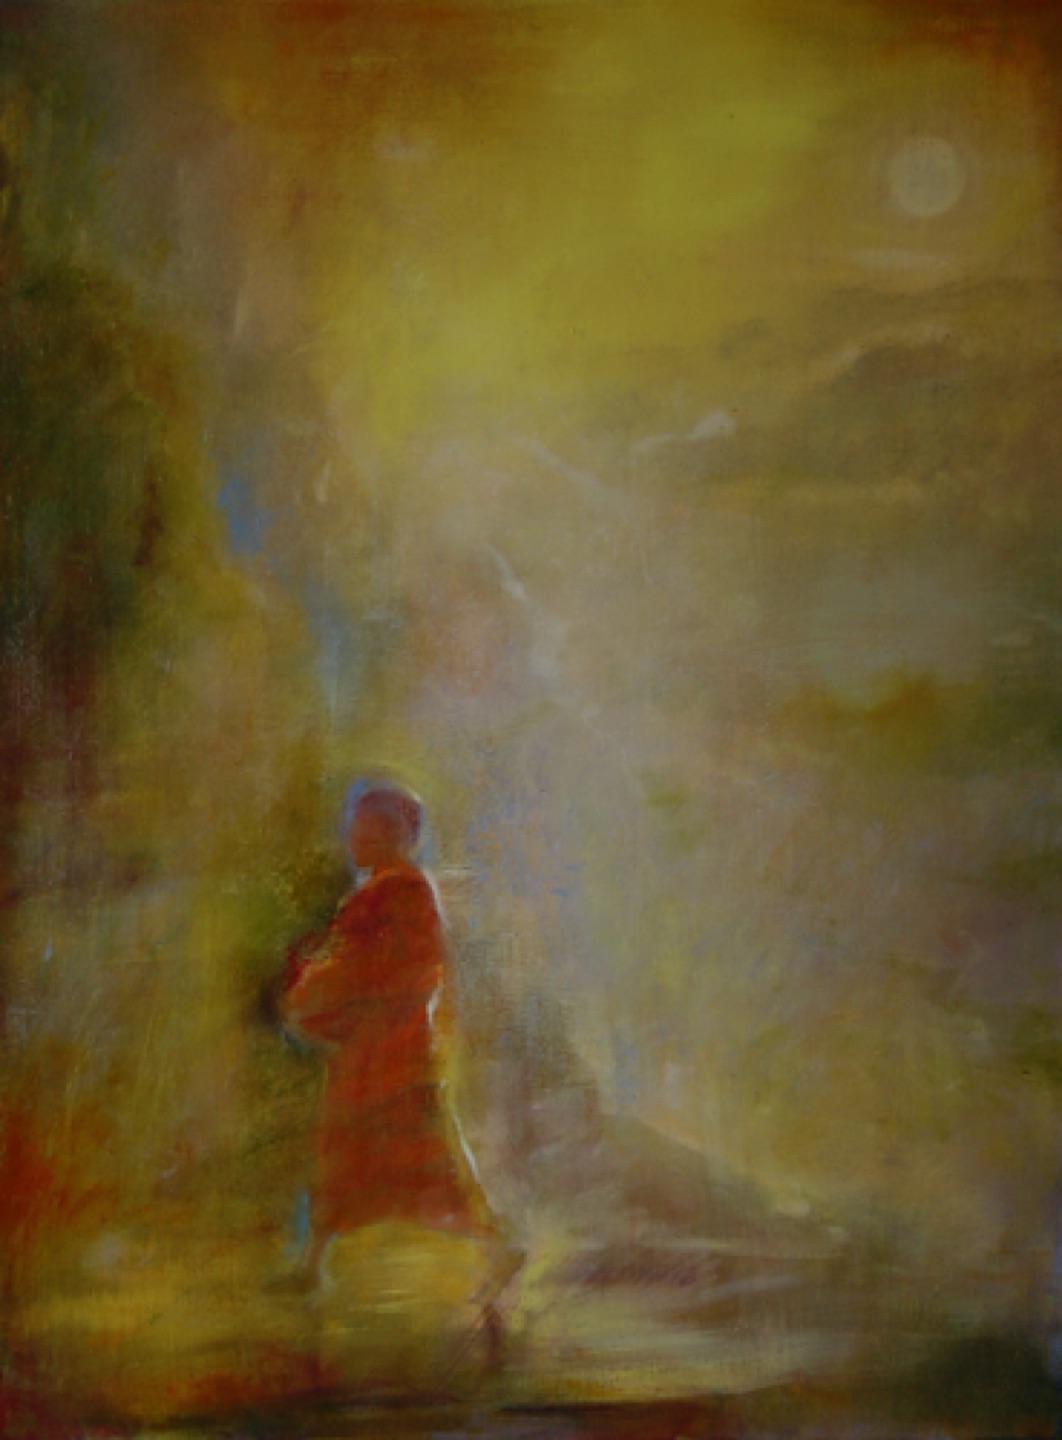 Gregg Chadwick
Sun at Midnight
40"x30"oil on linen 2004
Private Collection, San Francisco